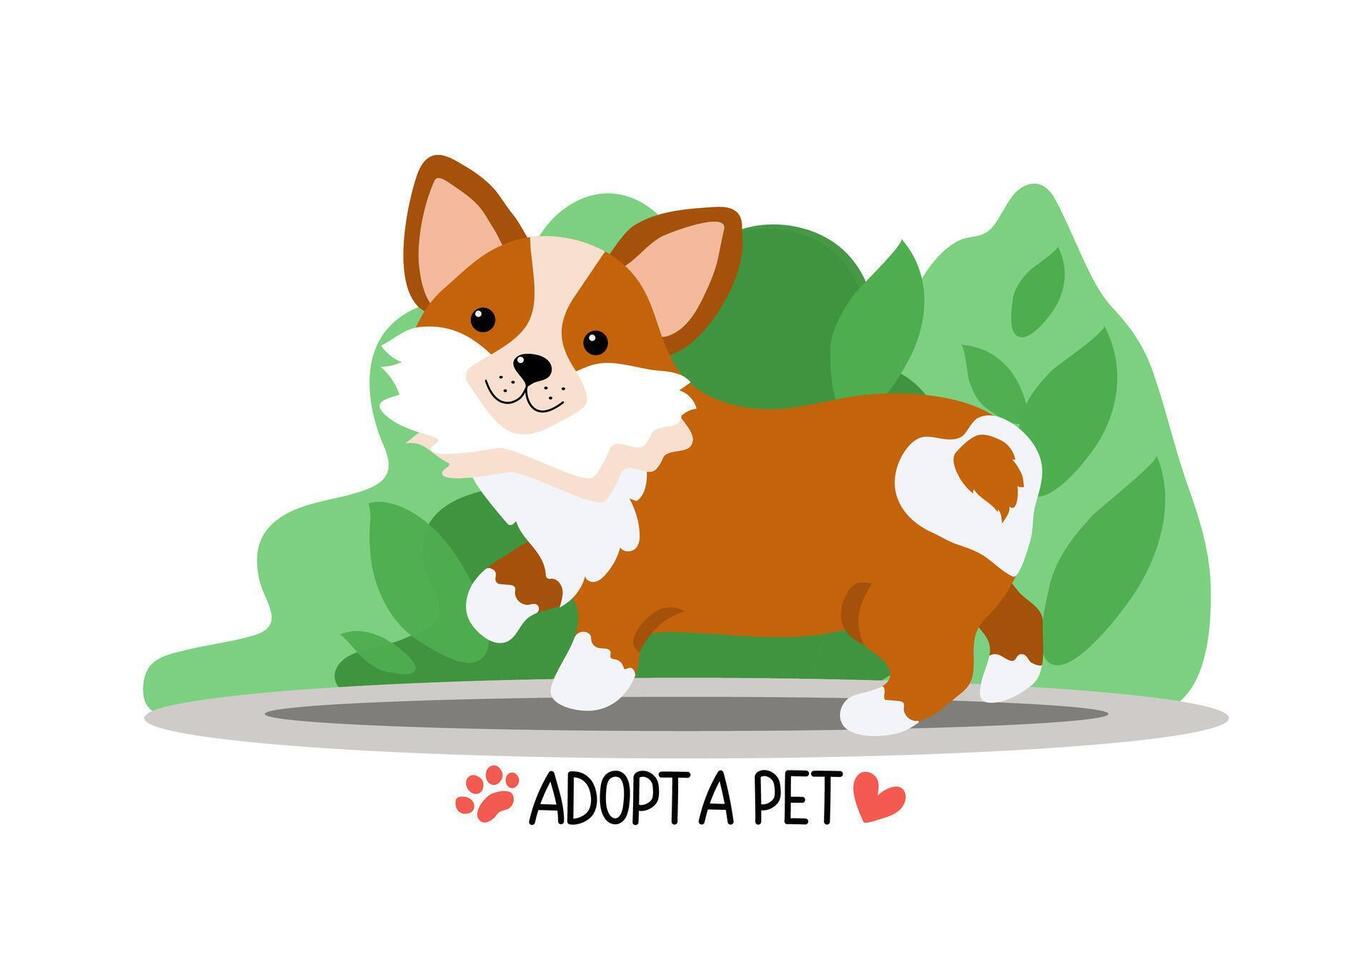 Adopts pets and fosters them. Pet adoption concept. Adopt a dog. Cute cartoon homeless puppy on the street. Text, inscription. Don't buy Pets, help homeless animals find a home. vector